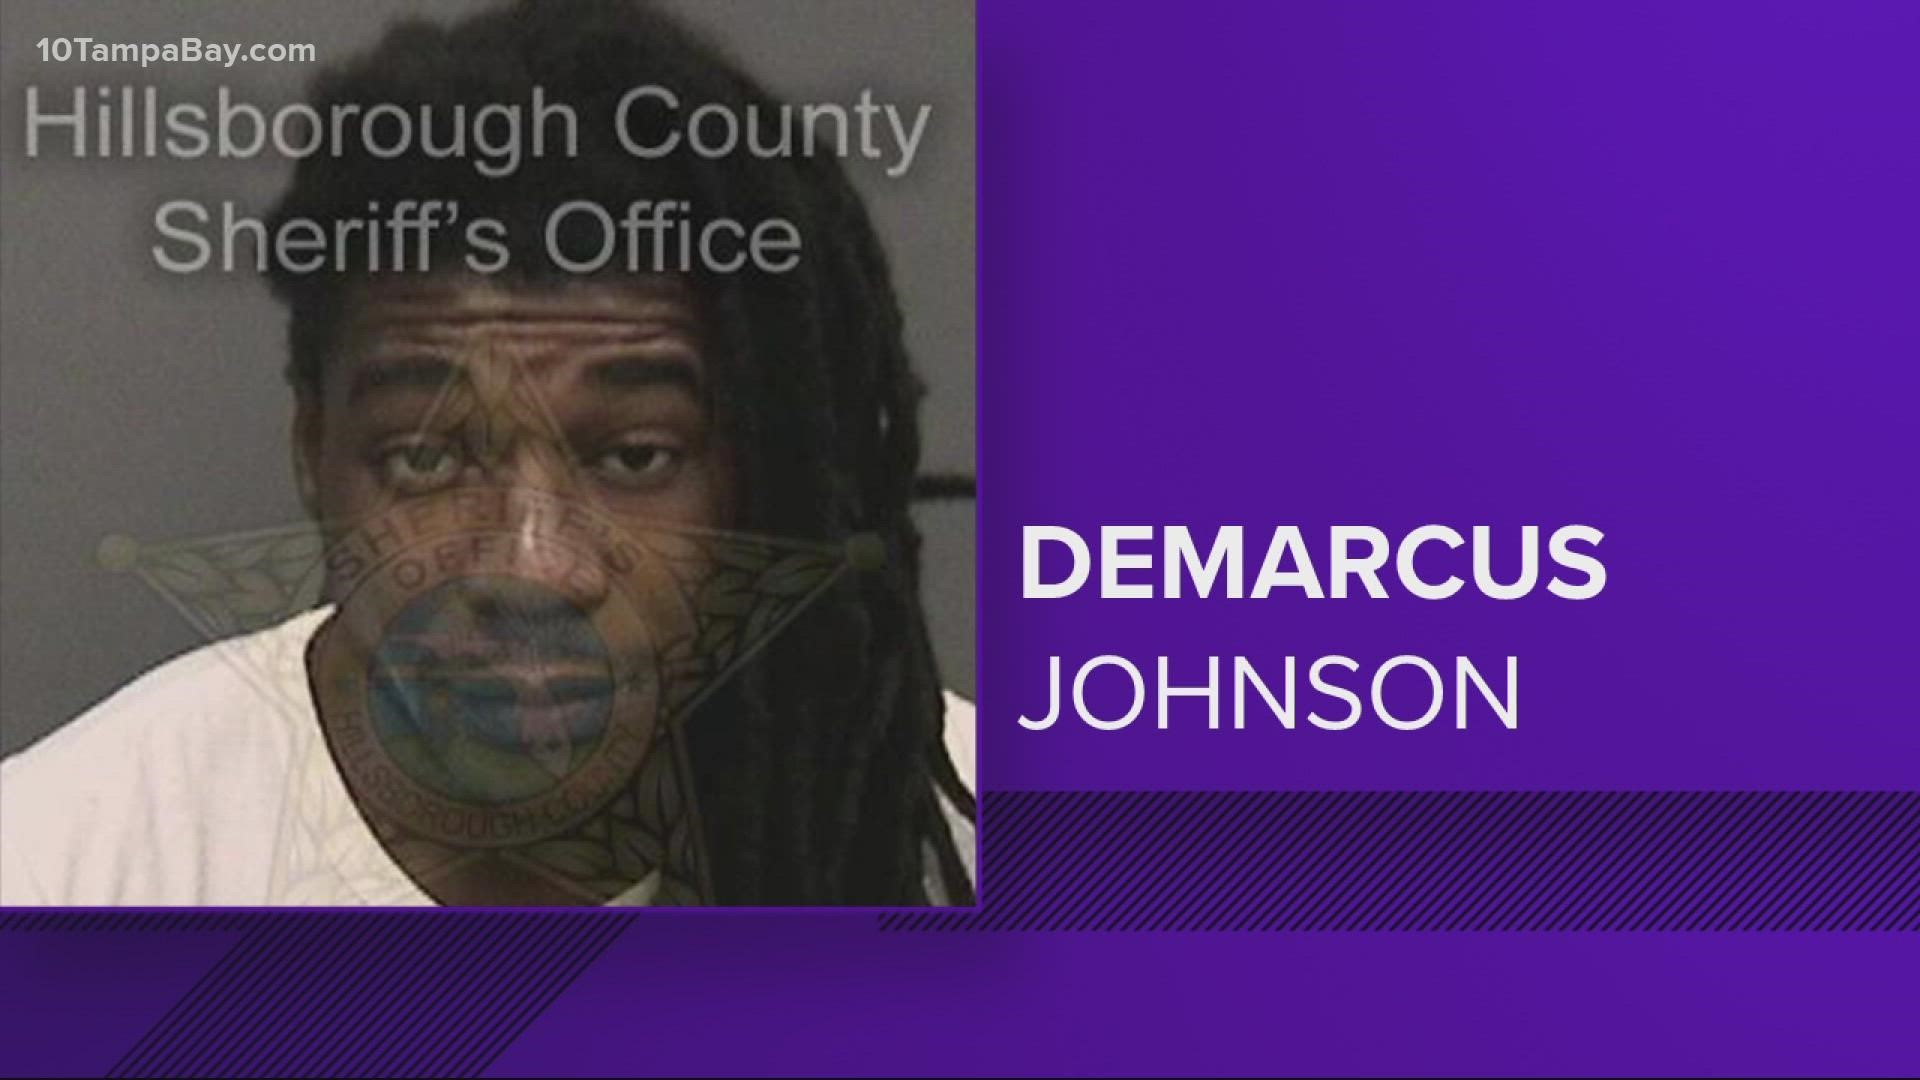 After serving his sentence, Demarcus Johnson will then serve five years on probation.